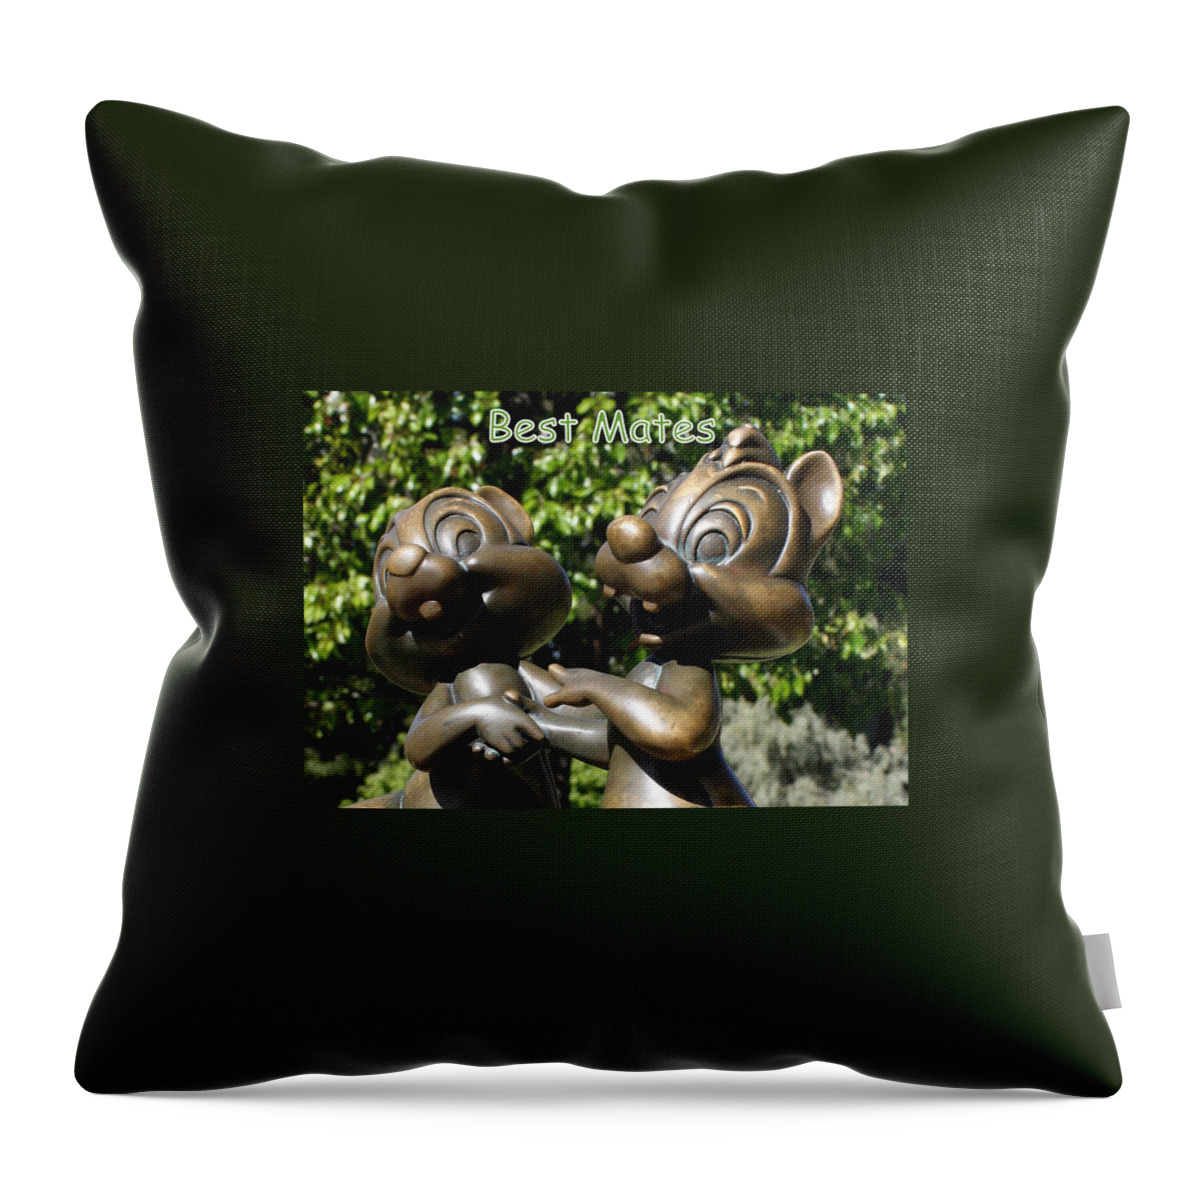 Greetings Cards Throw Pillow featuring the photograph Best Mates by David Nicholls